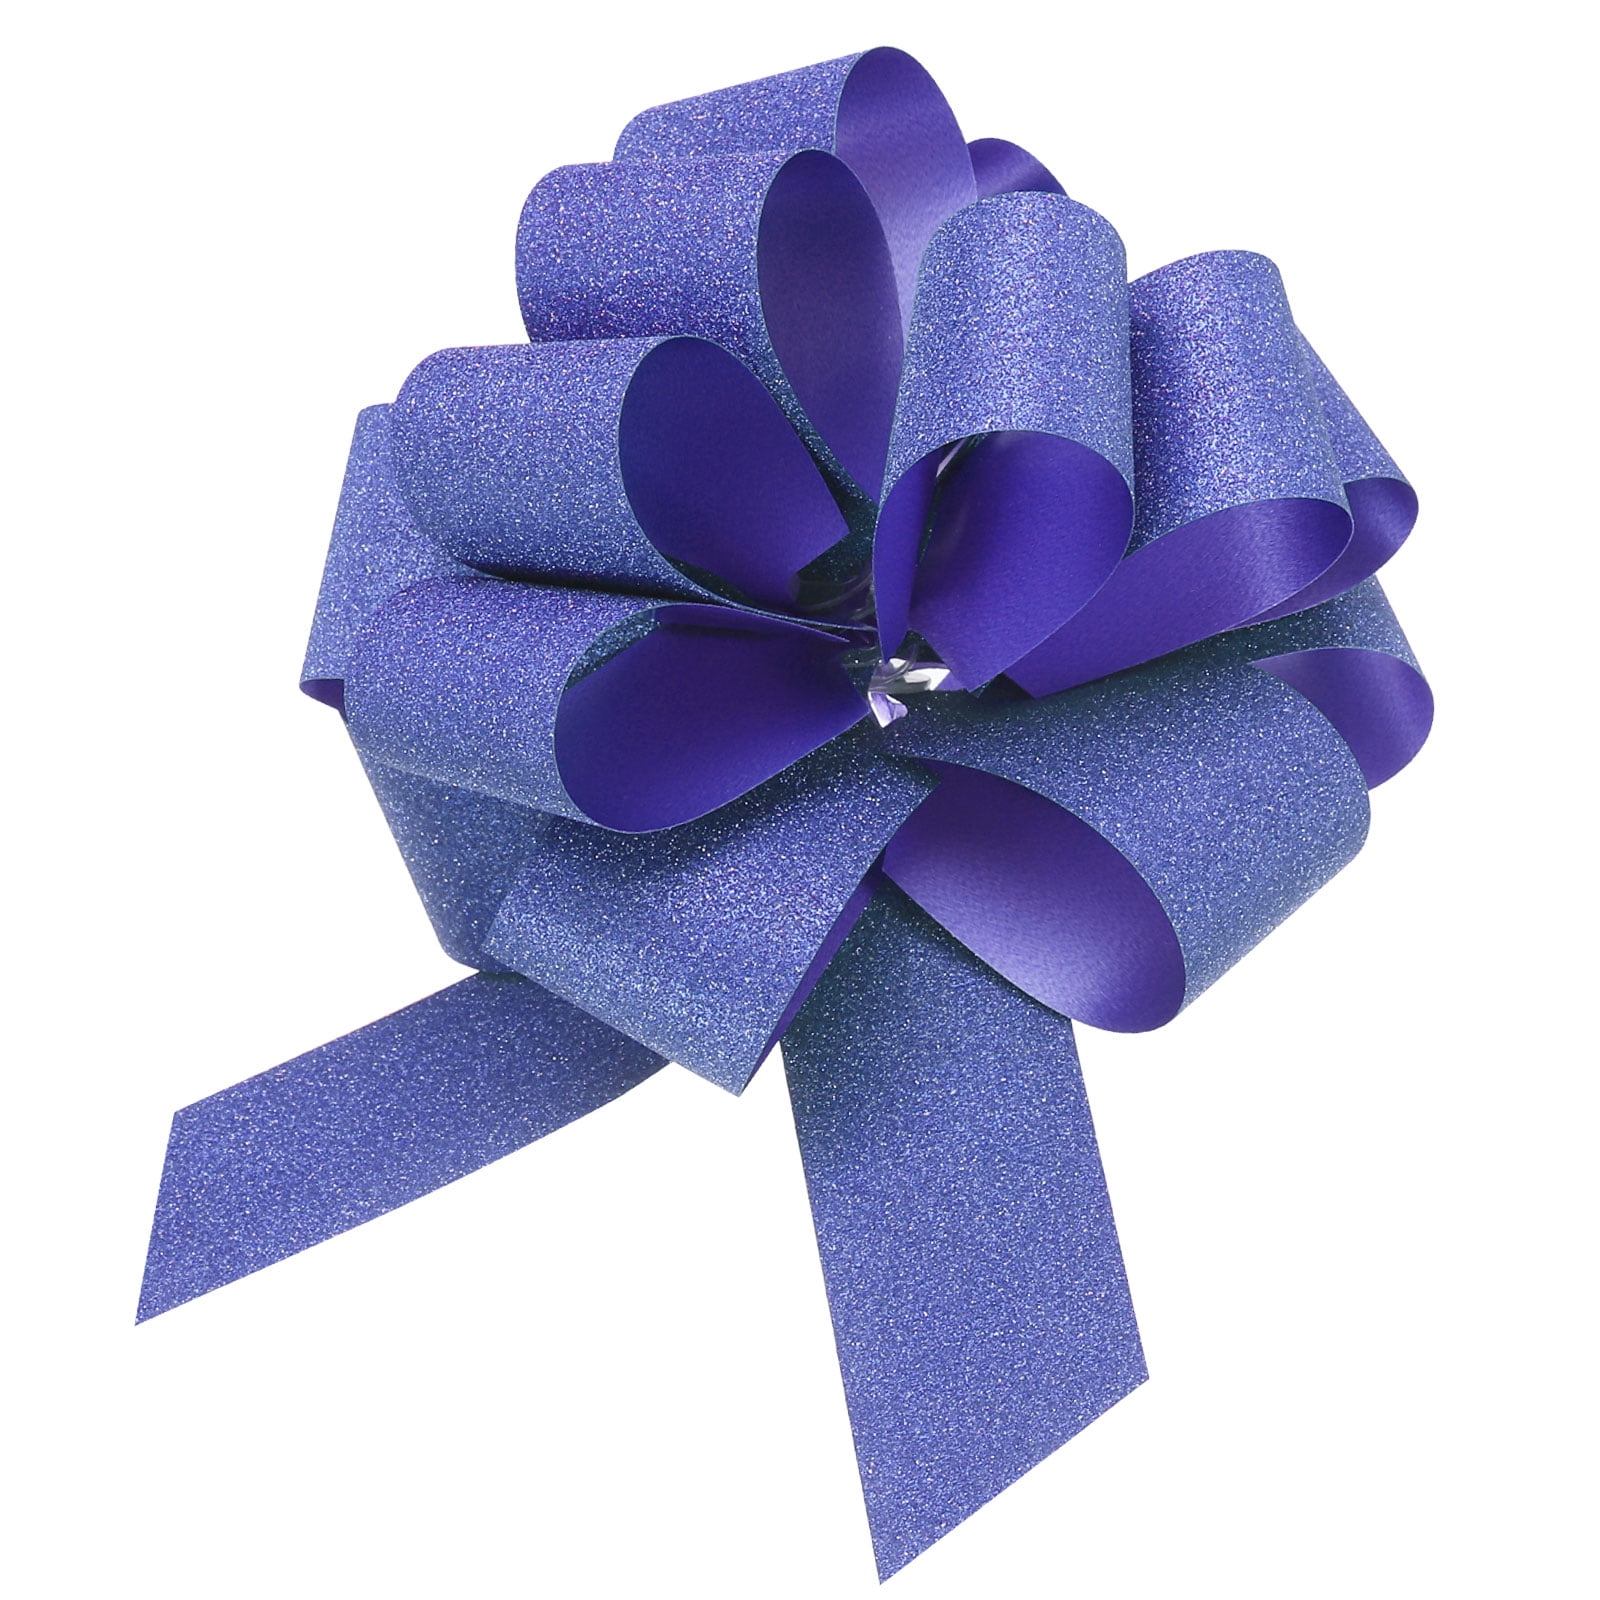 Hand tied Bows - Wired Indoor Outdoor Purple Velvet Bow 6 Inch